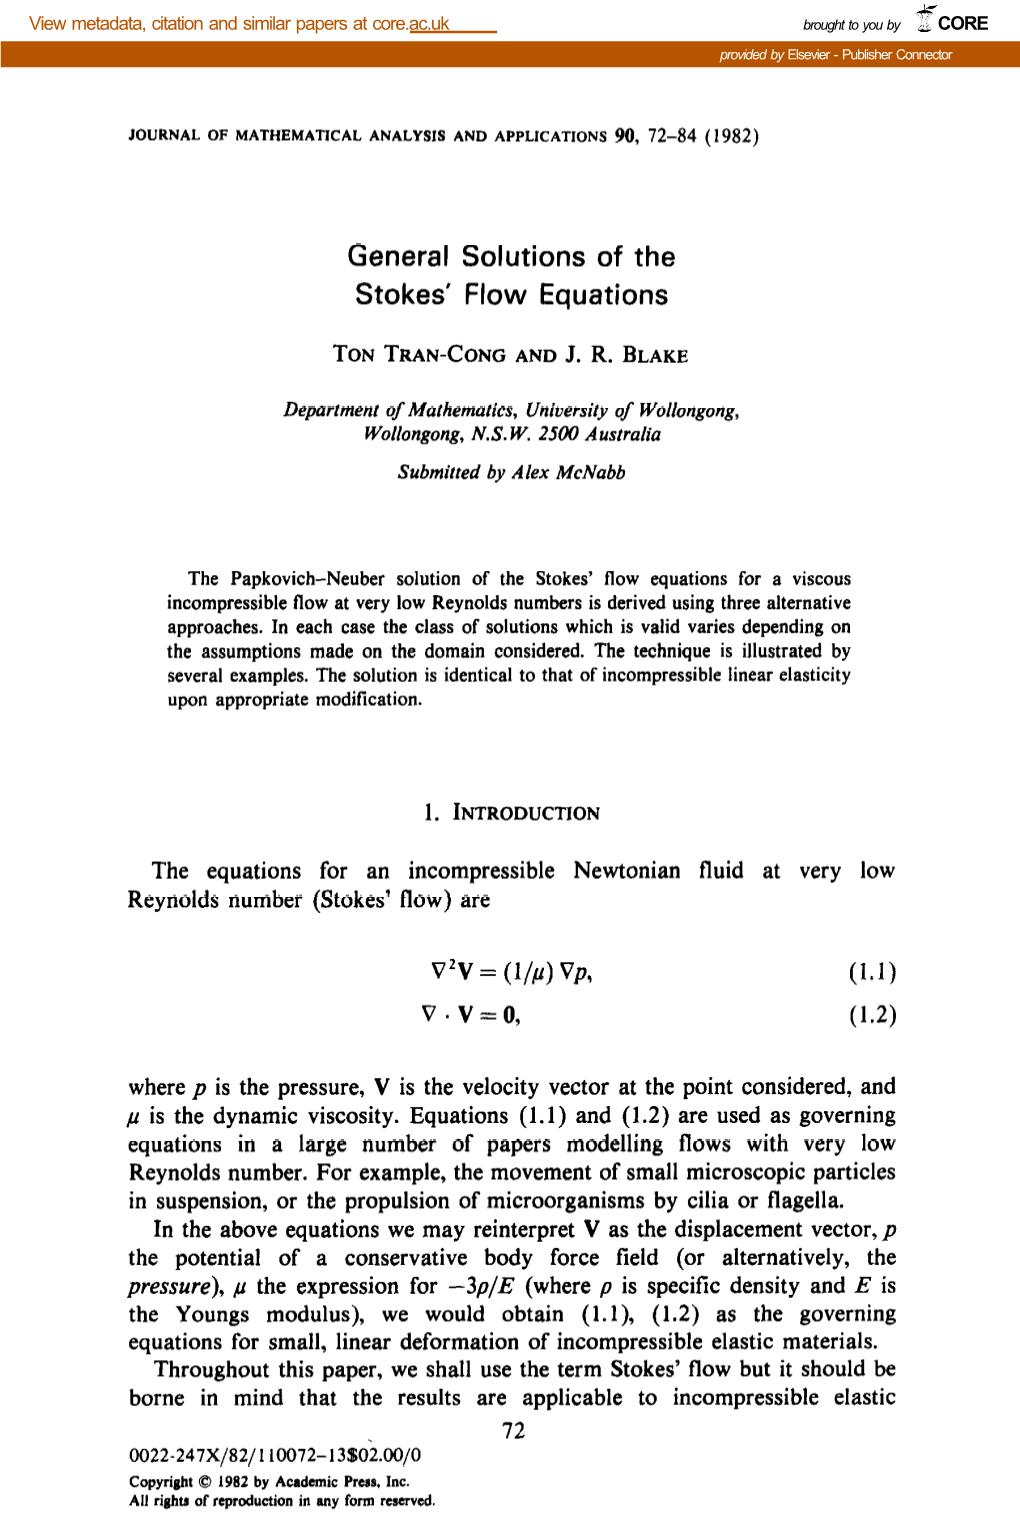 General Solutions of the Stokes' Flow Equations